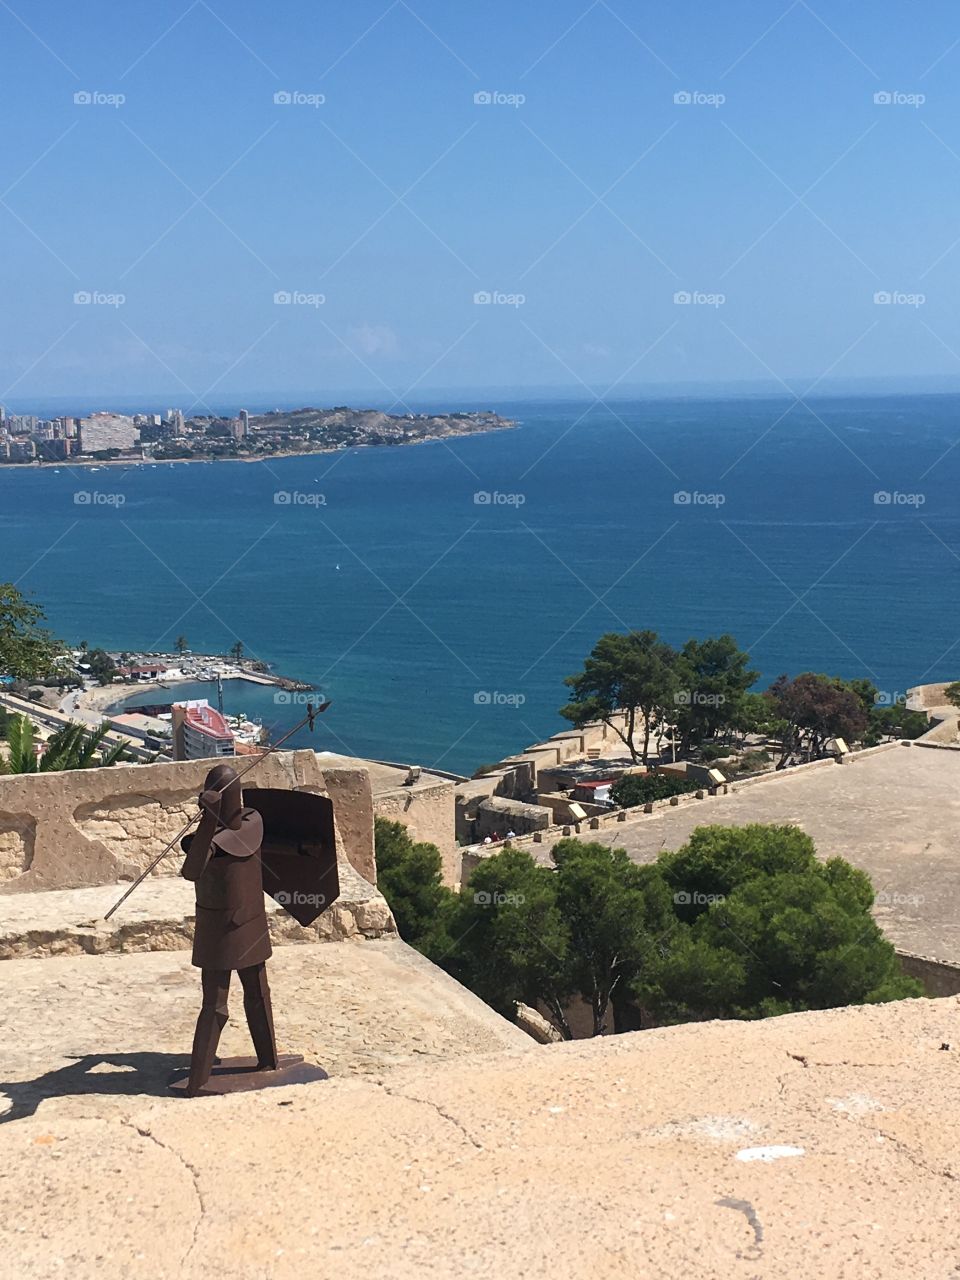 A picture taken of the view from Santa Barbara Castle in Alicante, Spain. Includes an ancient metal sculpture of a warrior 